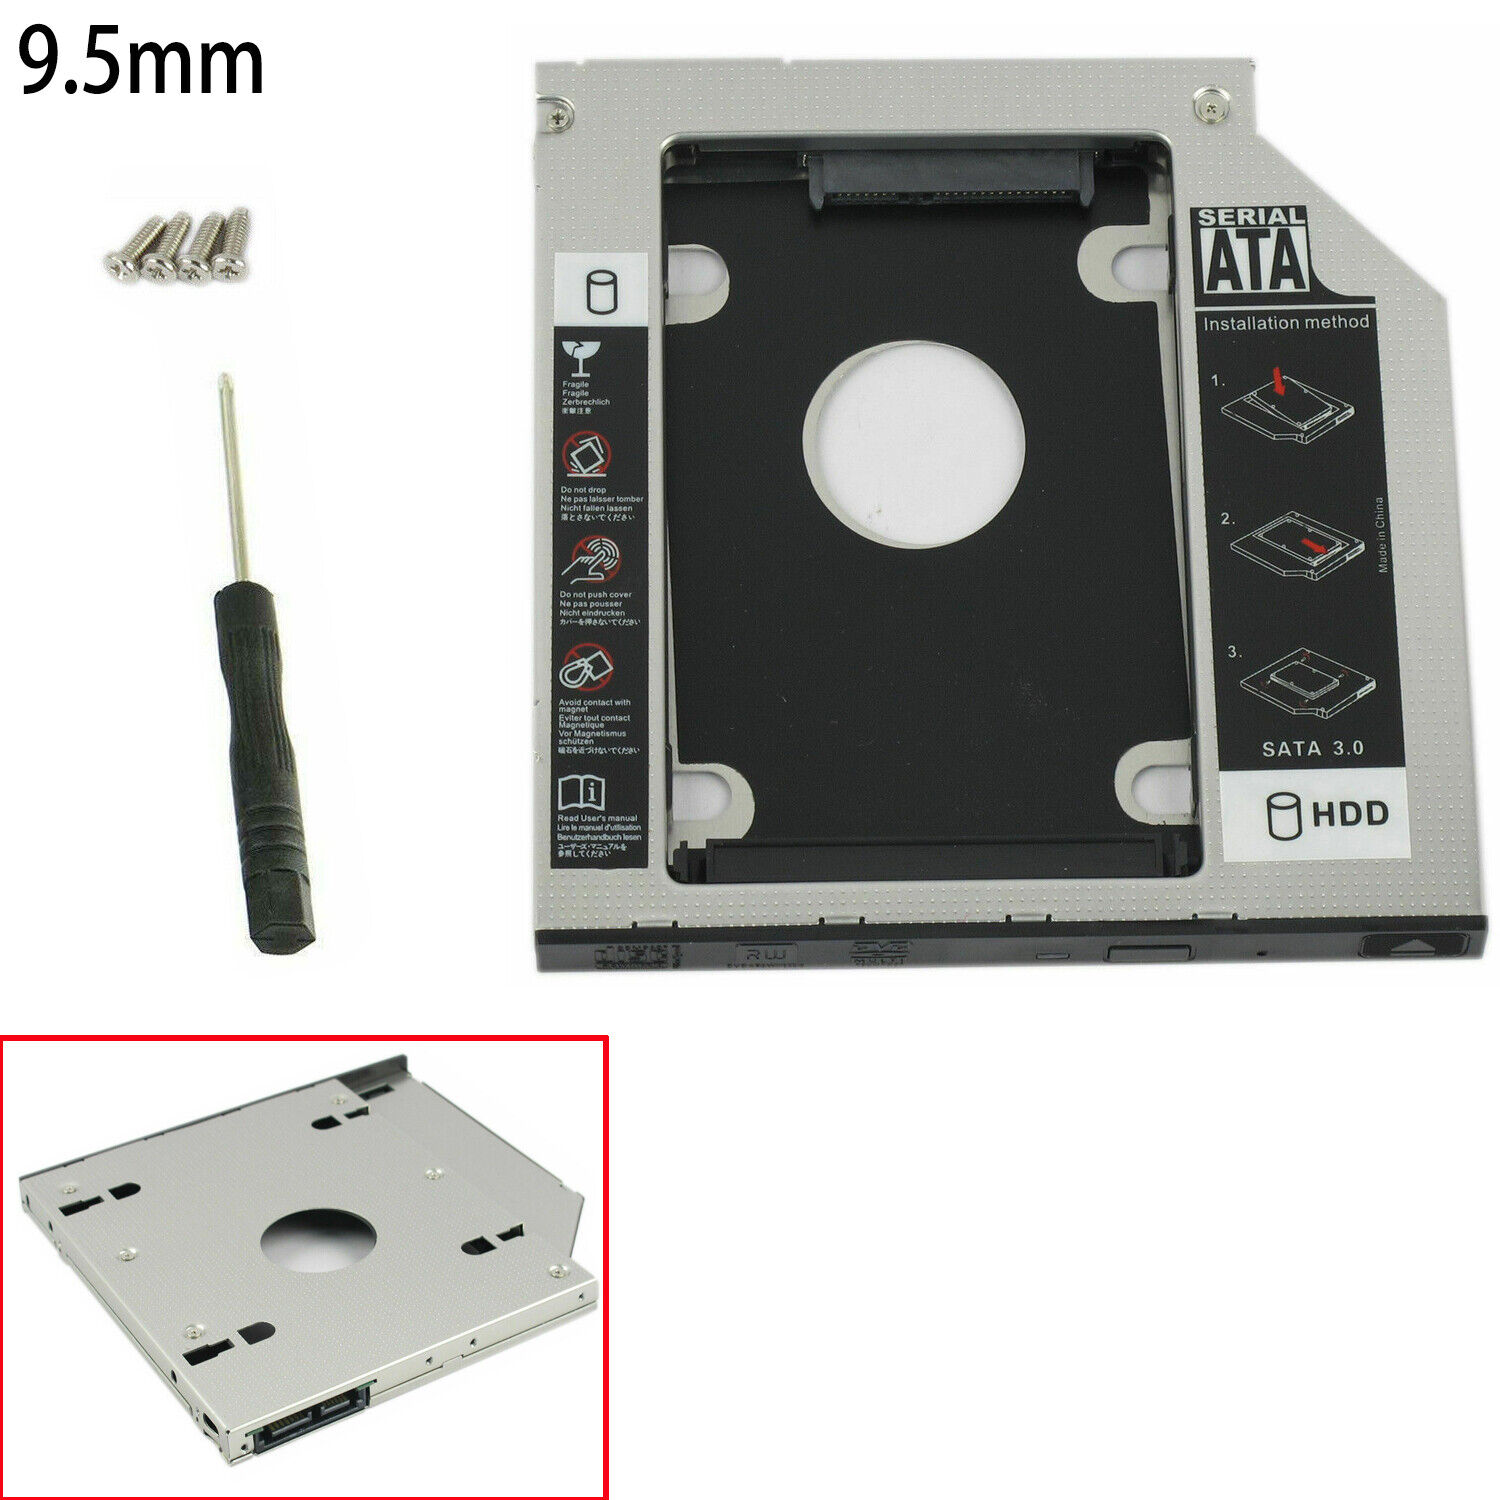 NEW 9.5mm Universal for SATA 2nd HDD SSD Hard Drive Caddy CD/DVD-ROM Optical Bay